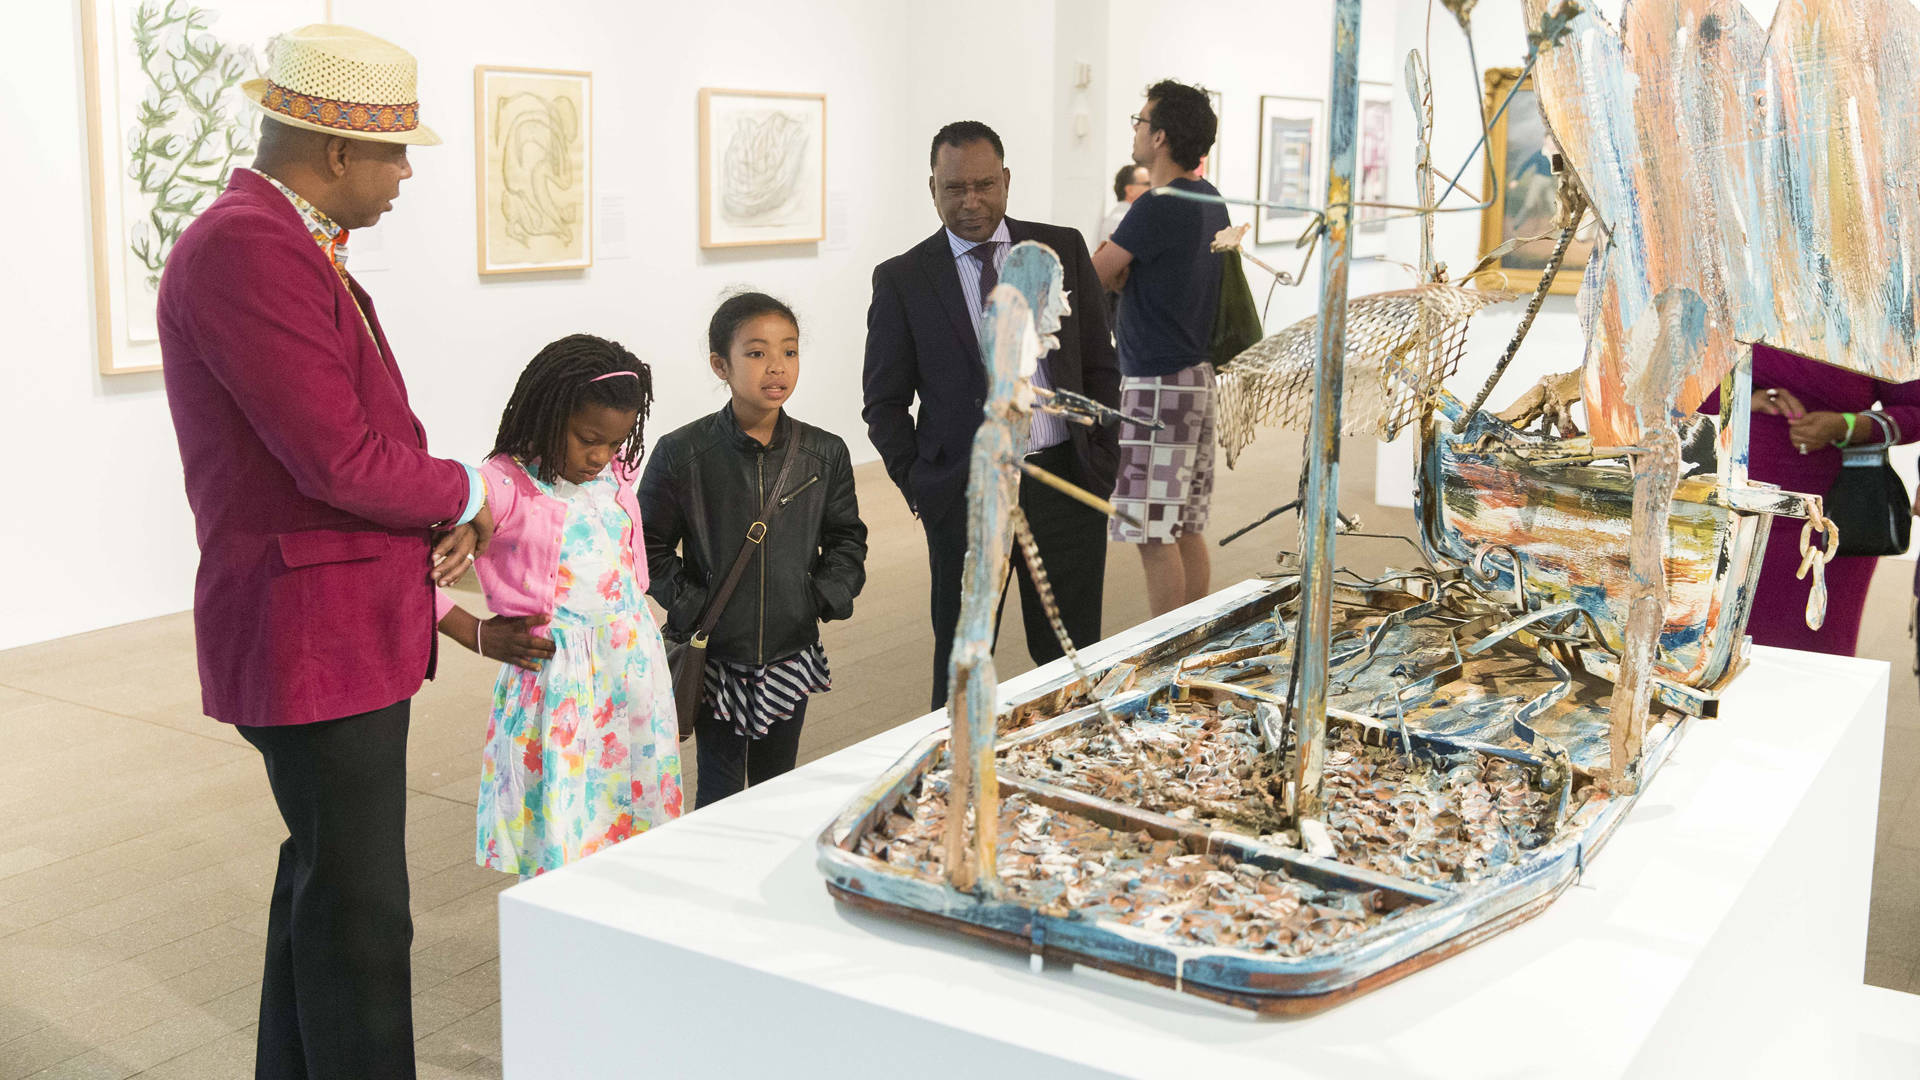 Guests viewing work by Thornton Dial, Jr., 'The Slave Ship,' 1988 in 'Revelations: Art from the African American South' at the de Young. Photo by Drew Altizer Photography; Courtesy of the Fine Arts Museums of San Francisco